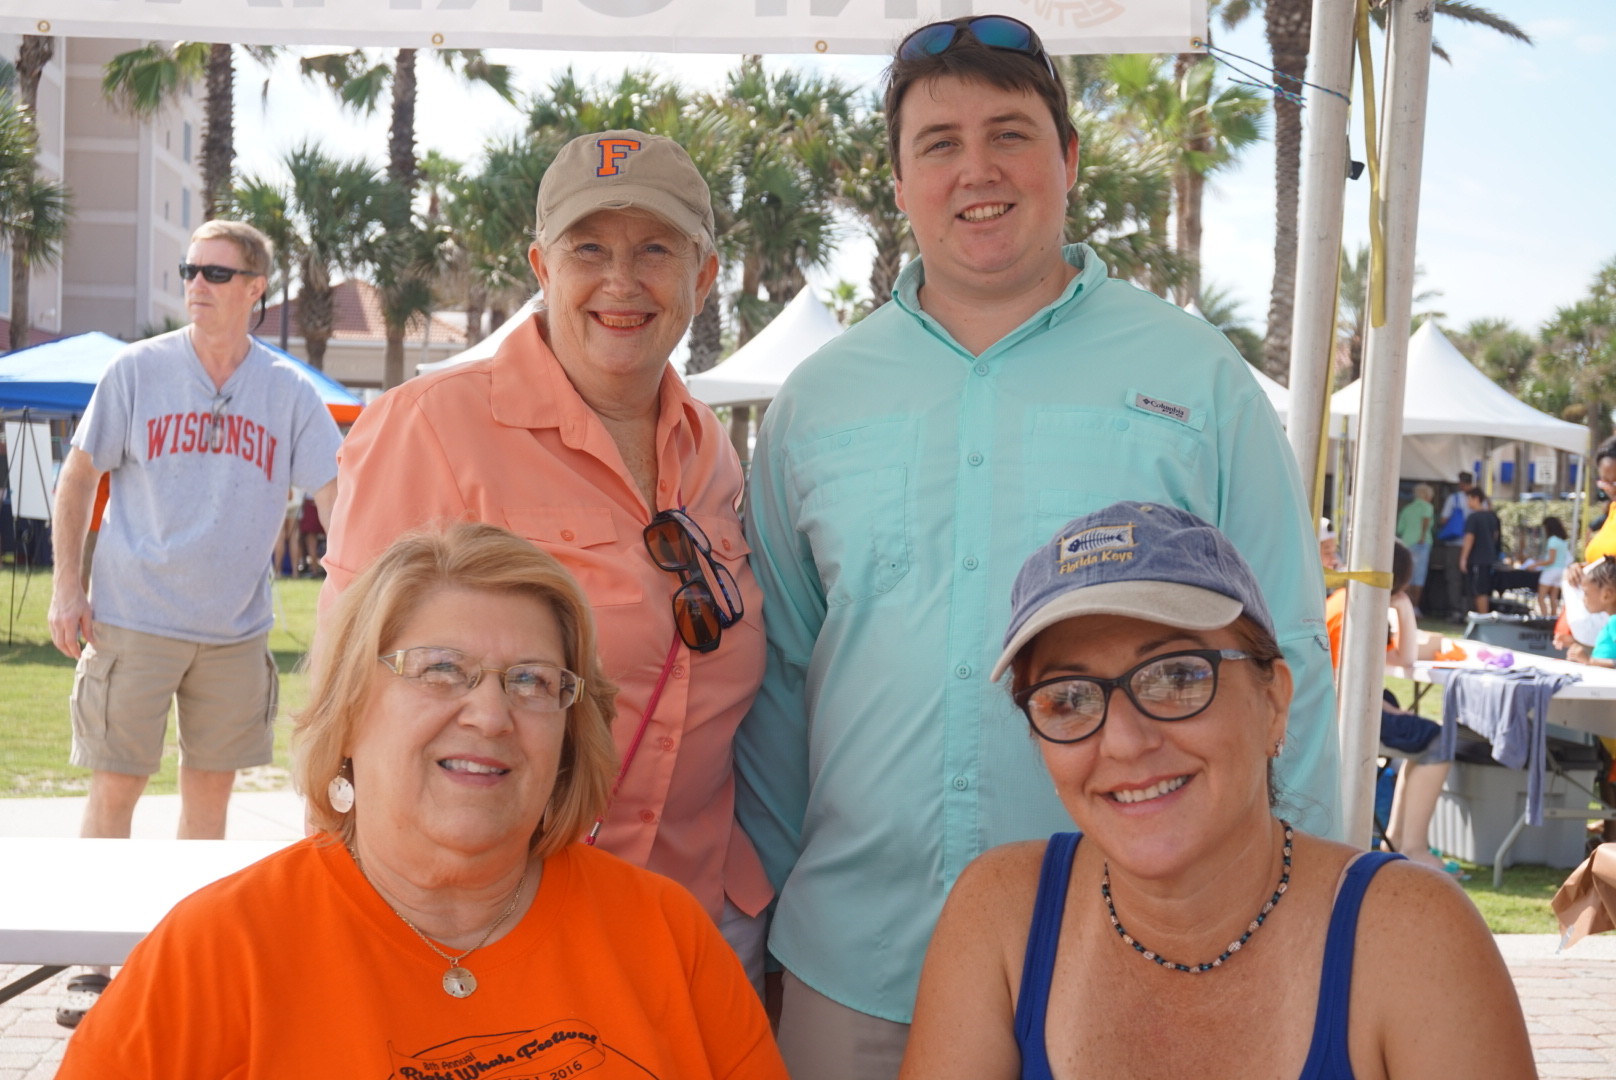 Event volunteers (back row, left to right) Troy Winn-Hutchinson and Parker Quillen (front row, left to right) with Sue Bonnes and Cyndie Thomson